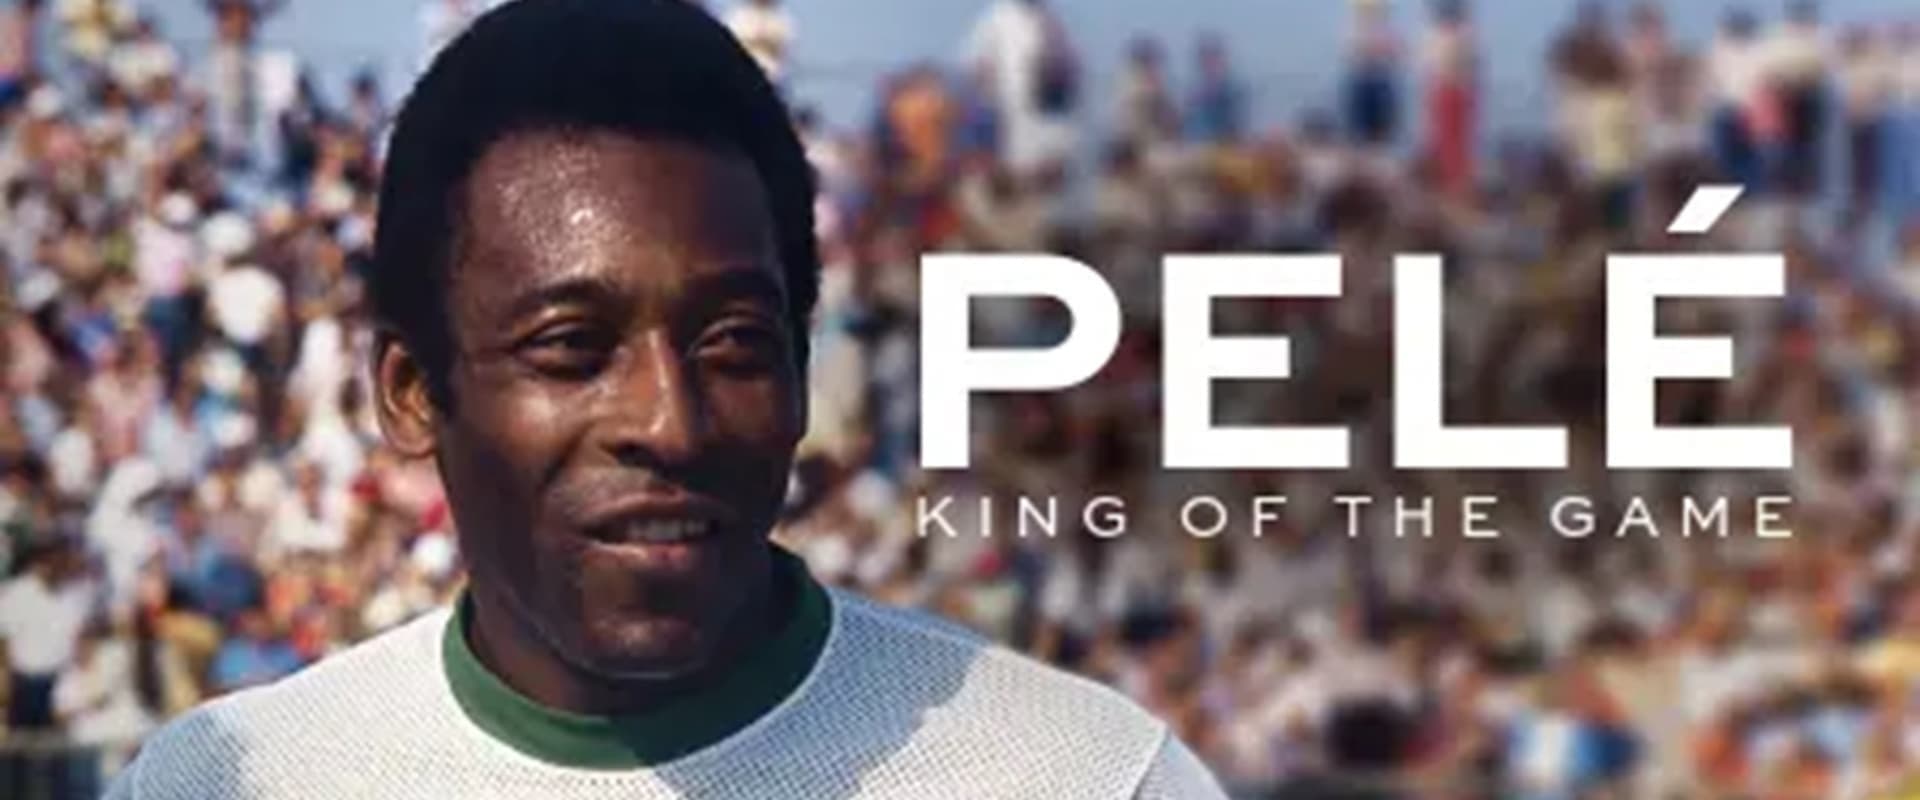 Pelé: King of the Game